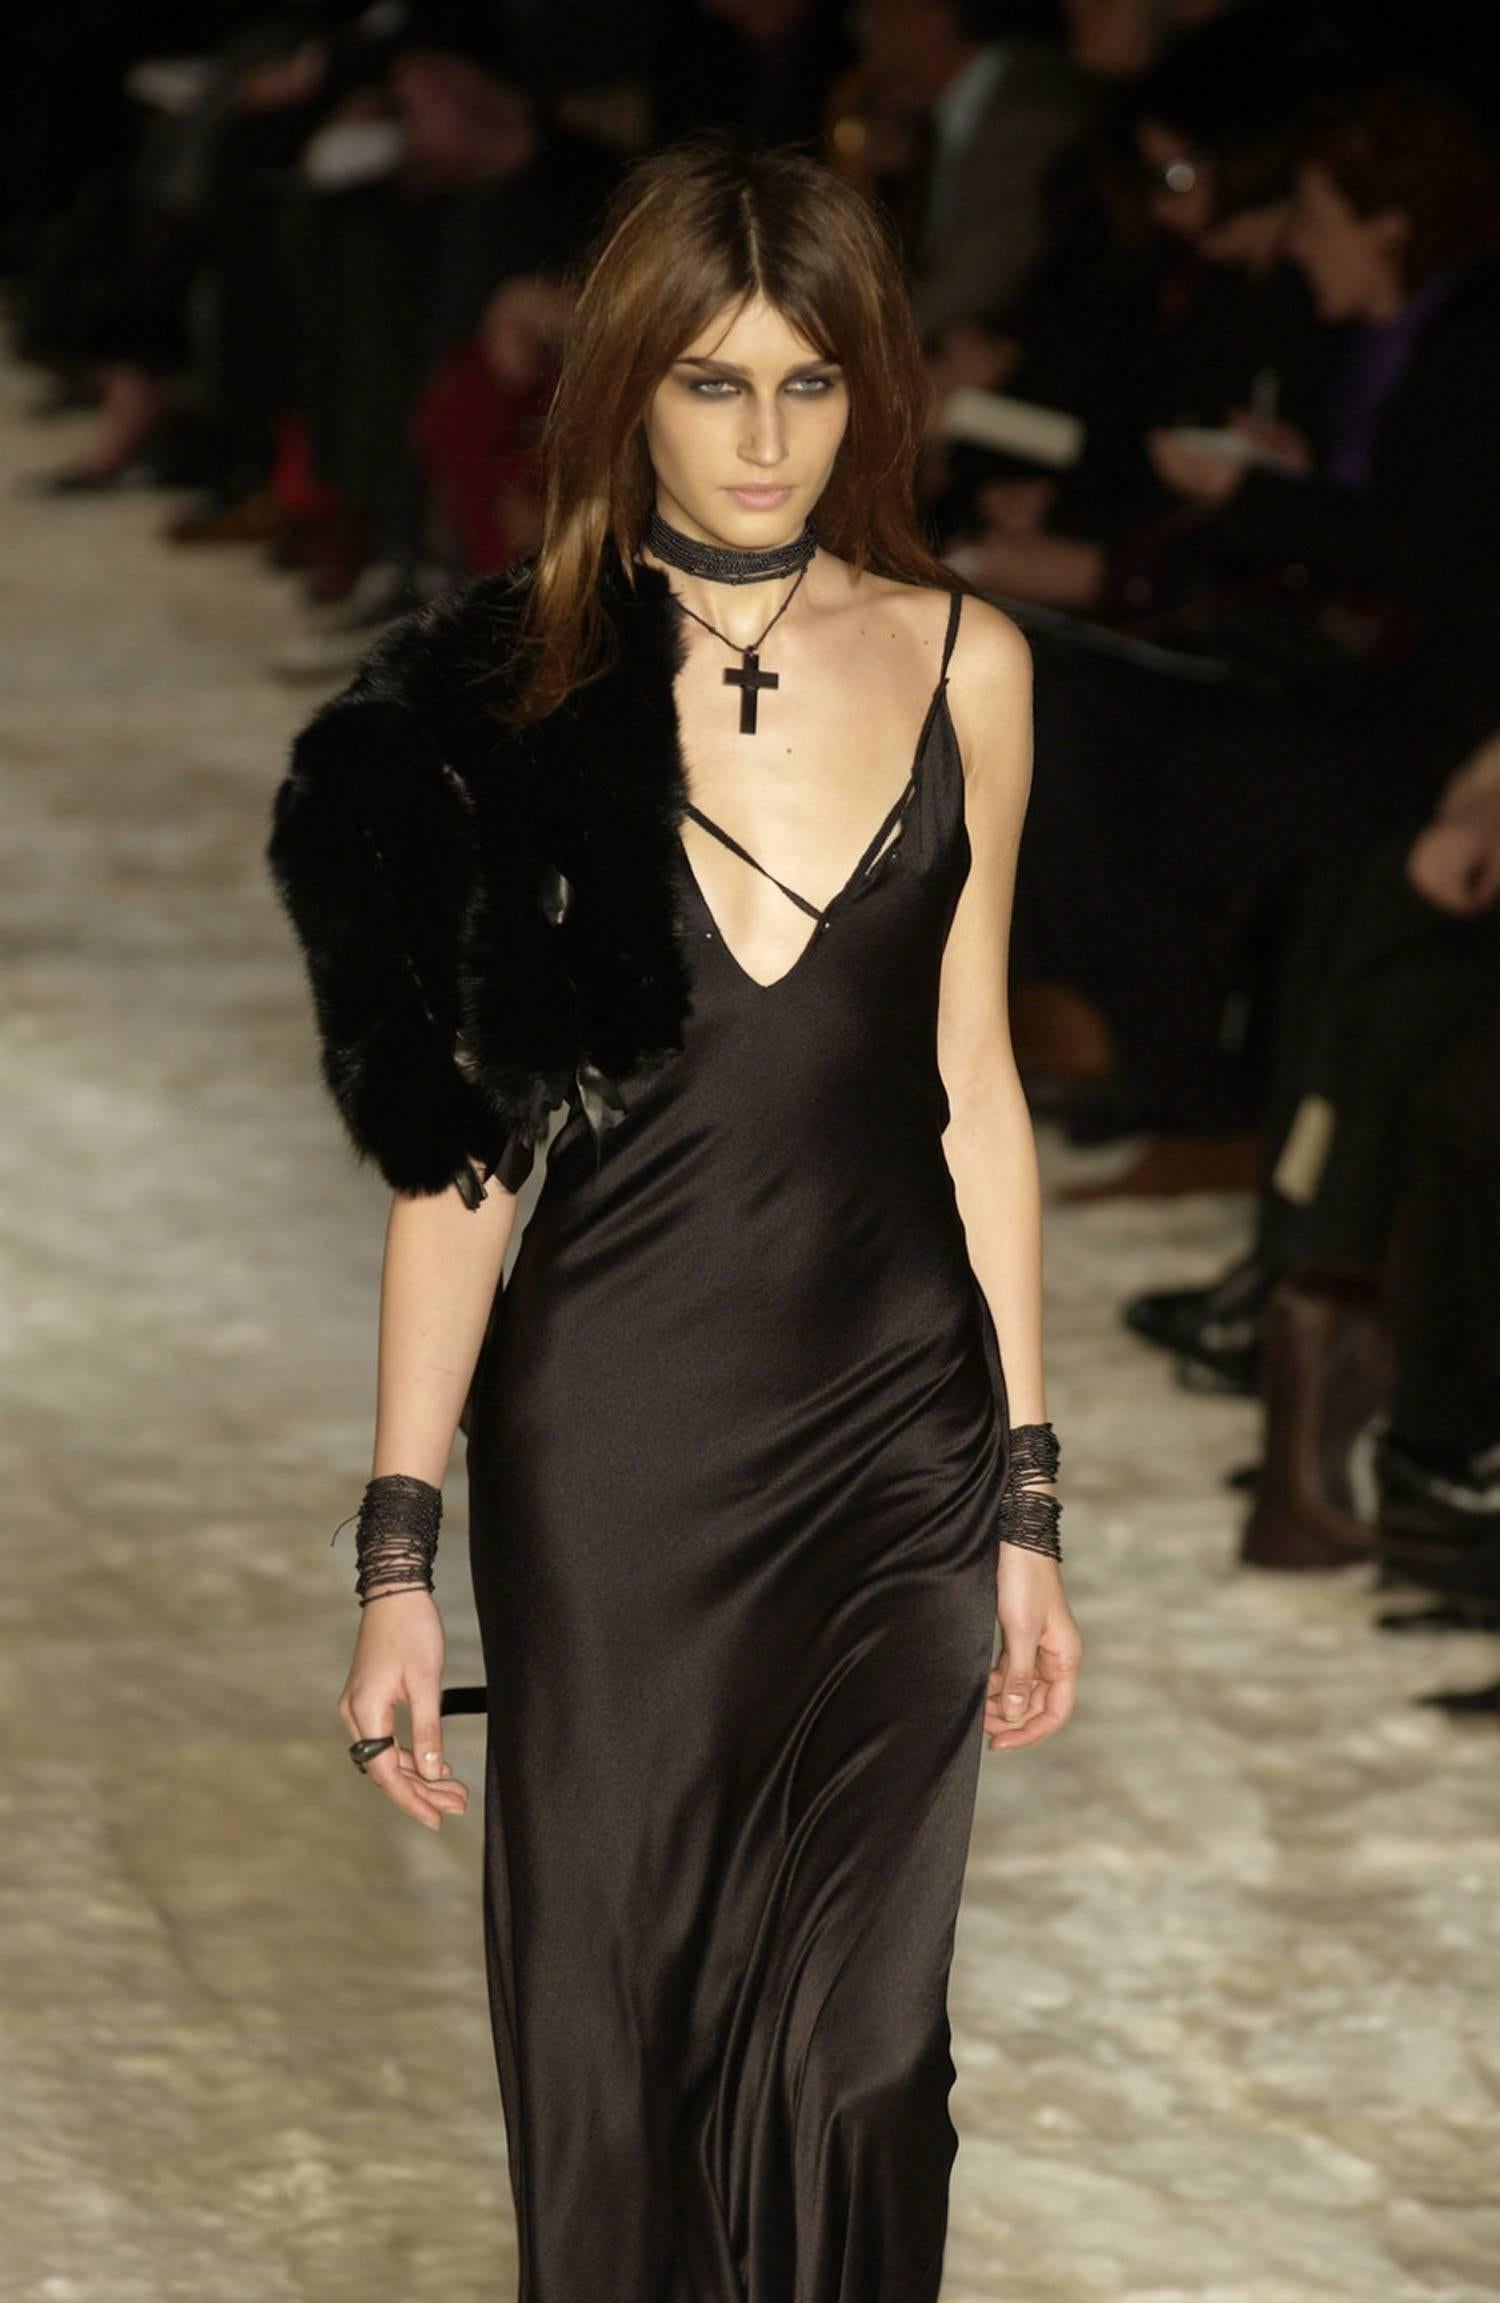 gucci by tom ford dress